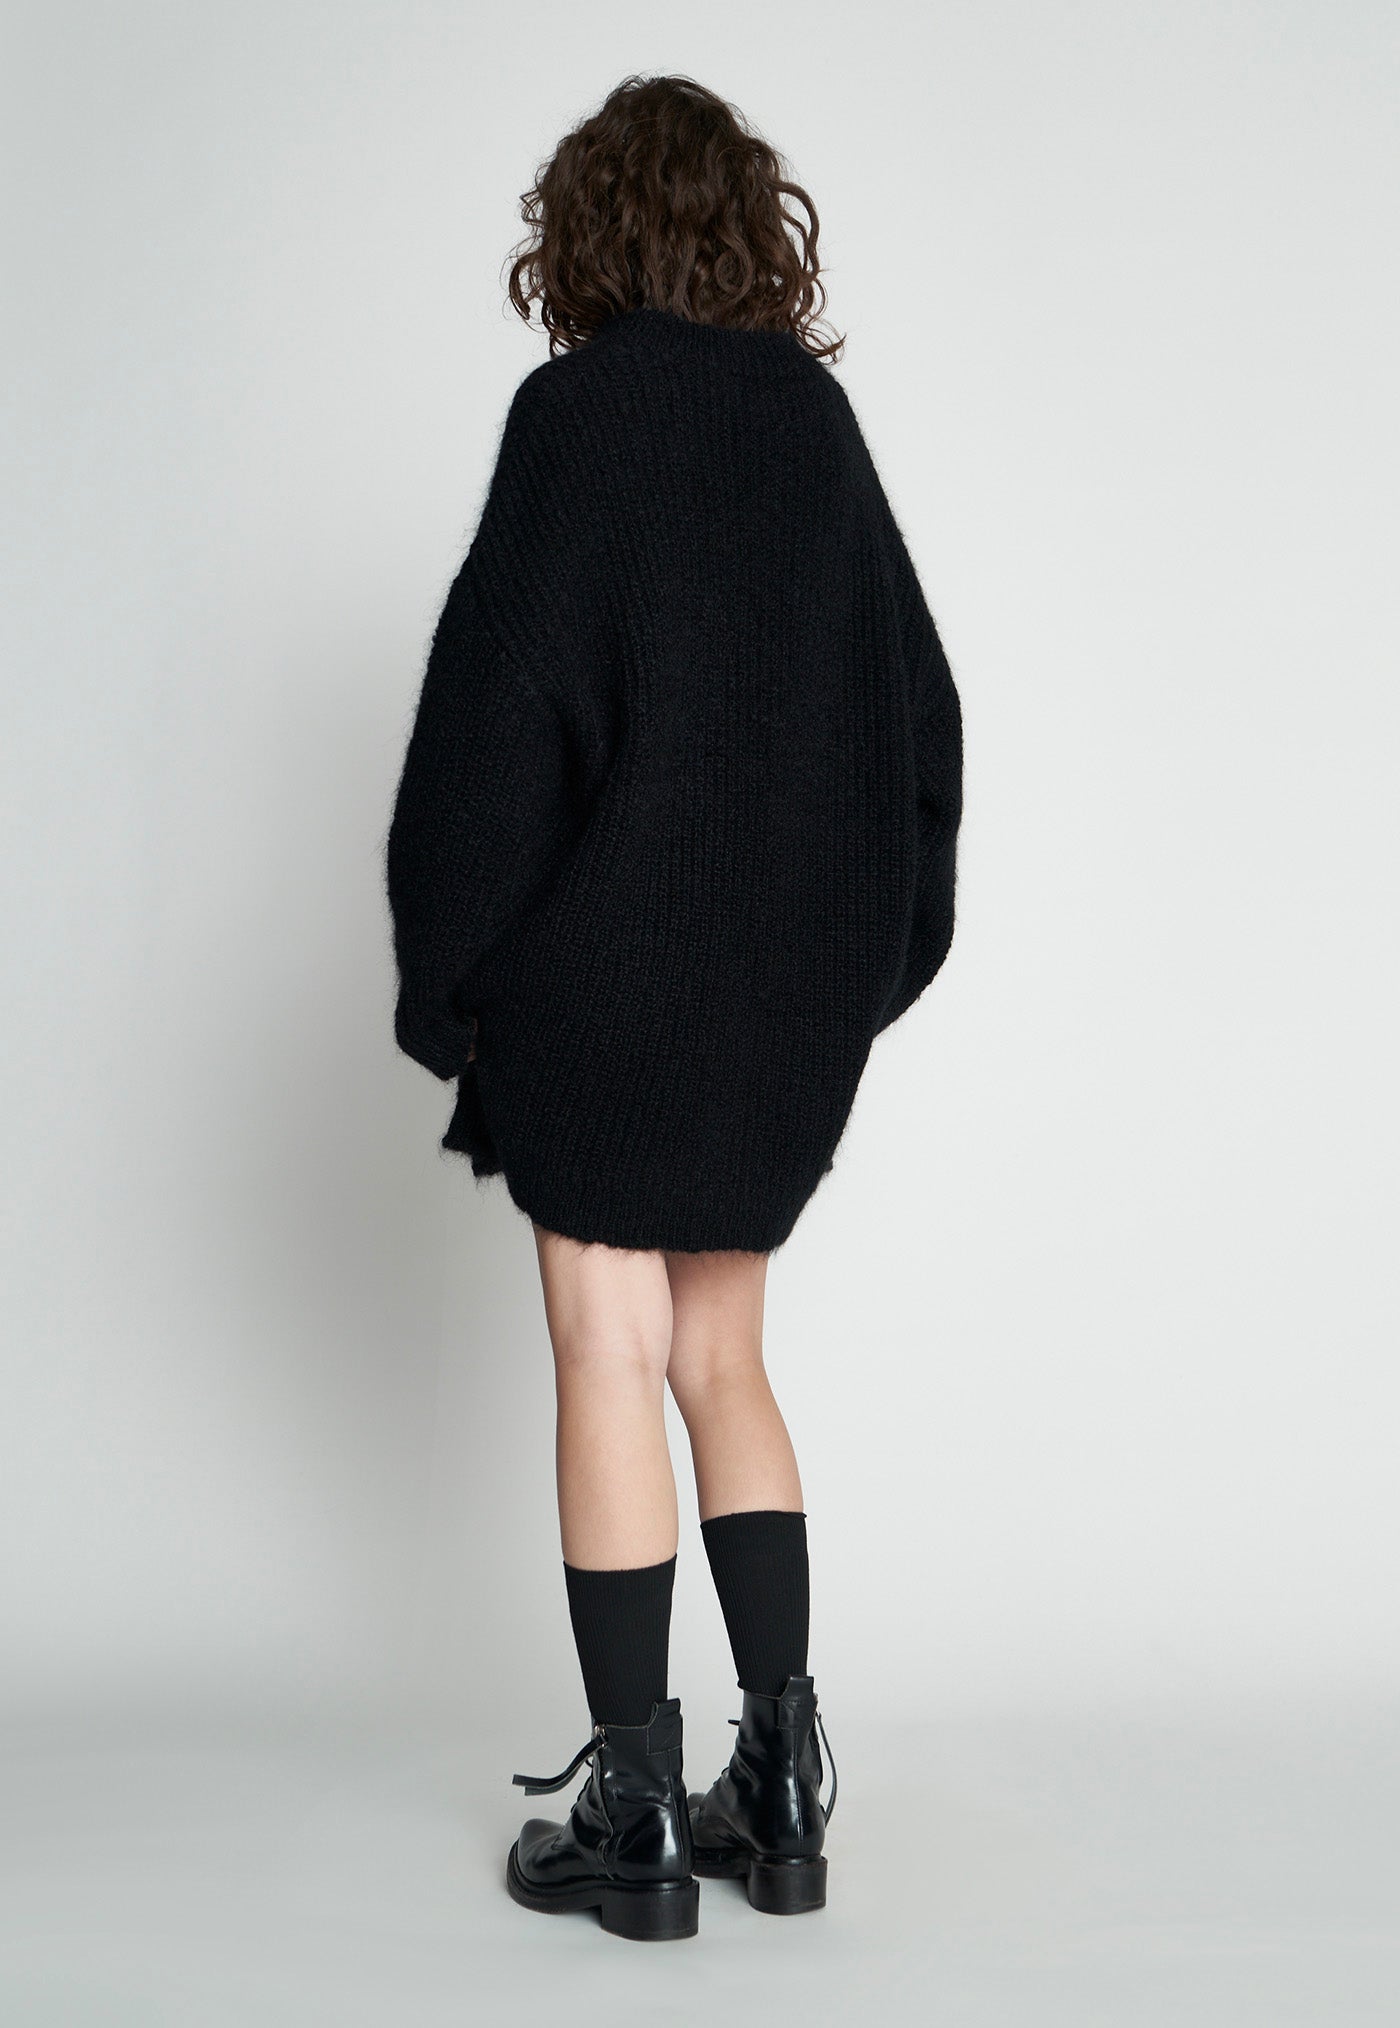 Quinn Sweater - Black sold by Angel Divine